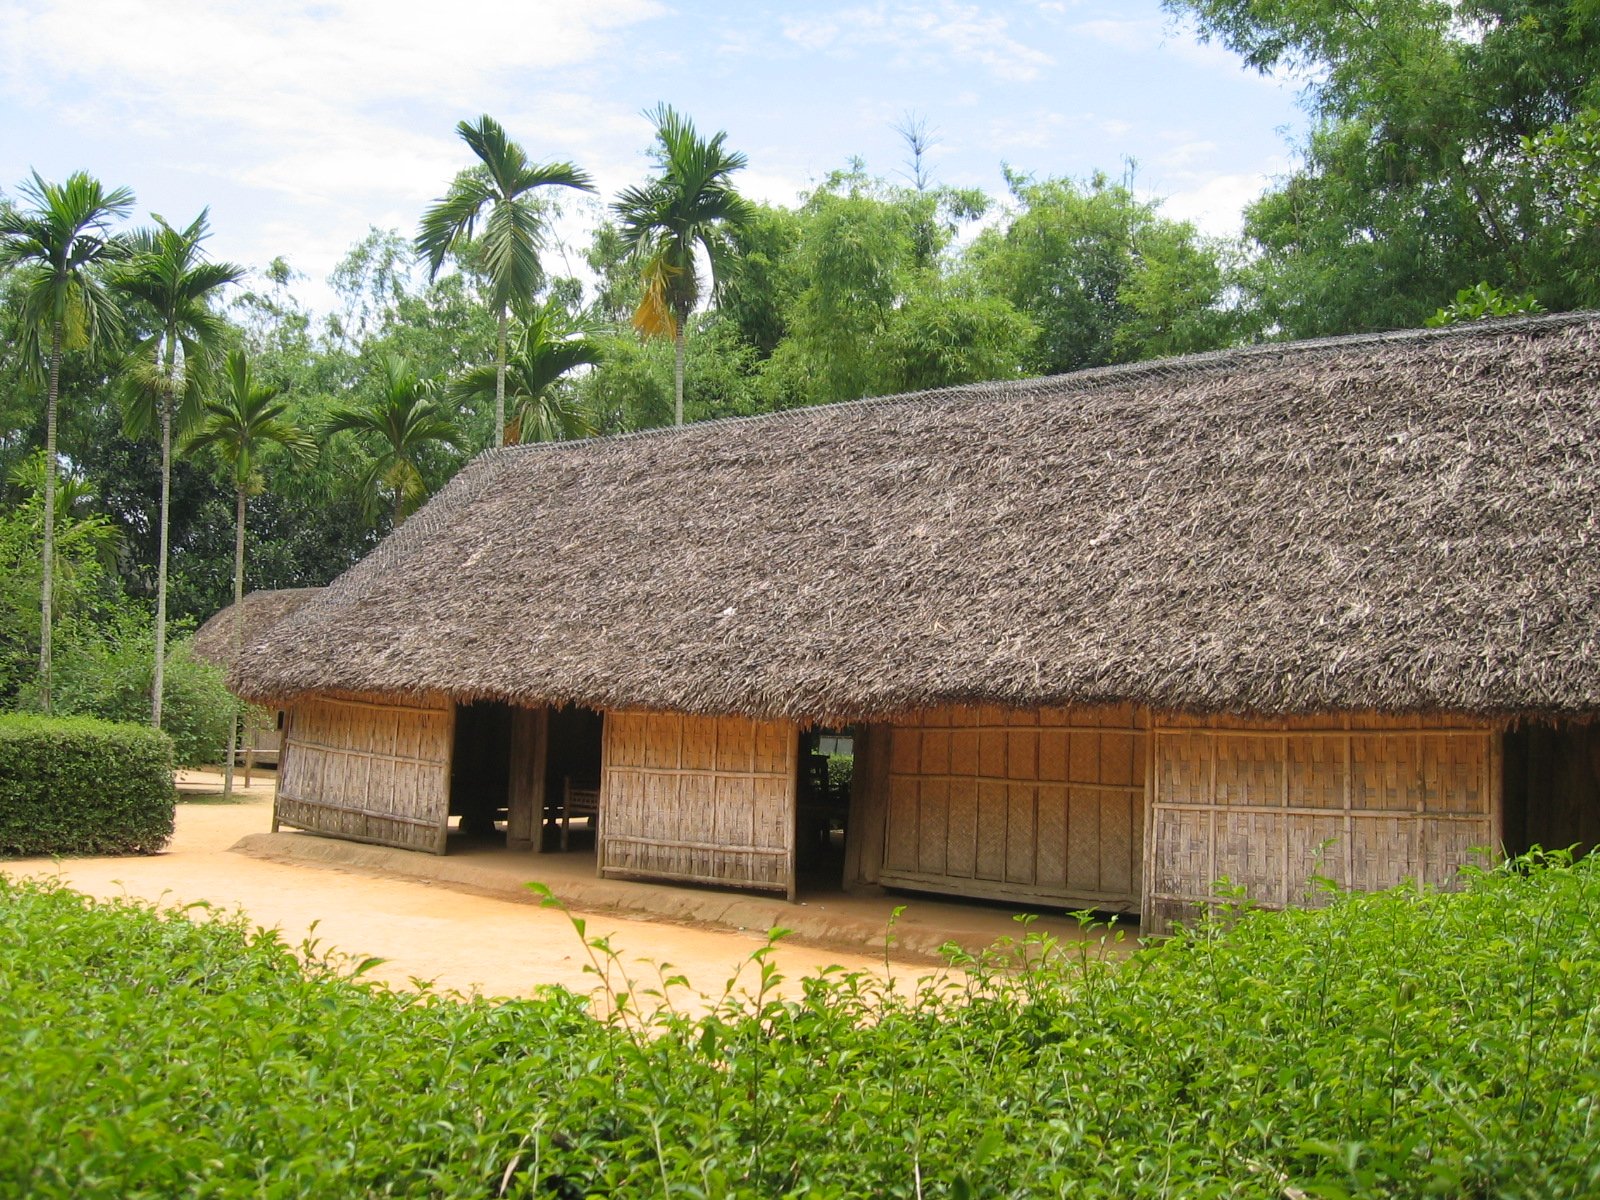 the village has been built using a large grass field